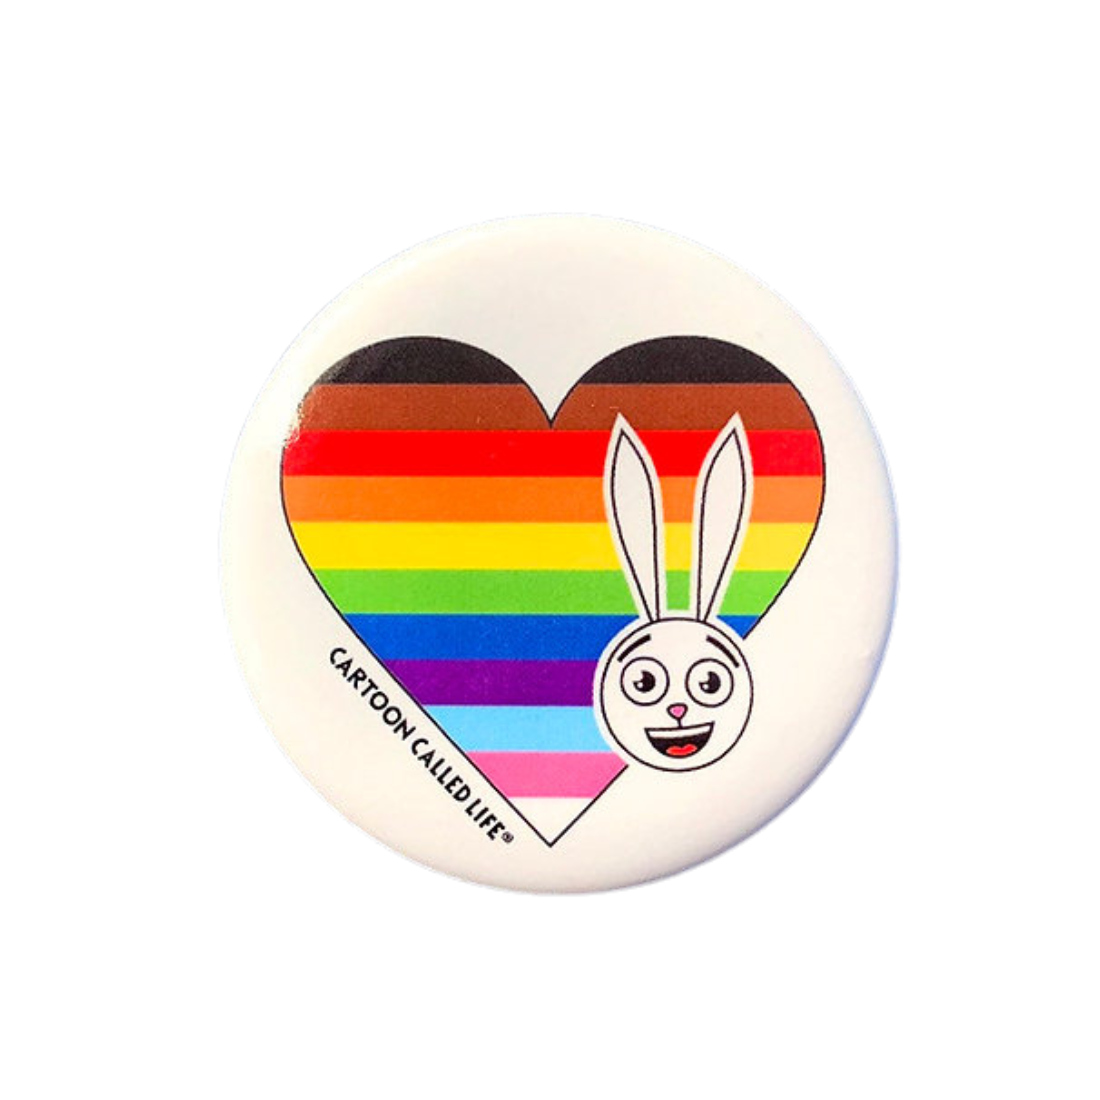 Buy Bunny’s “Badges set of 6” from Cartoon Called Life at Flavourez.